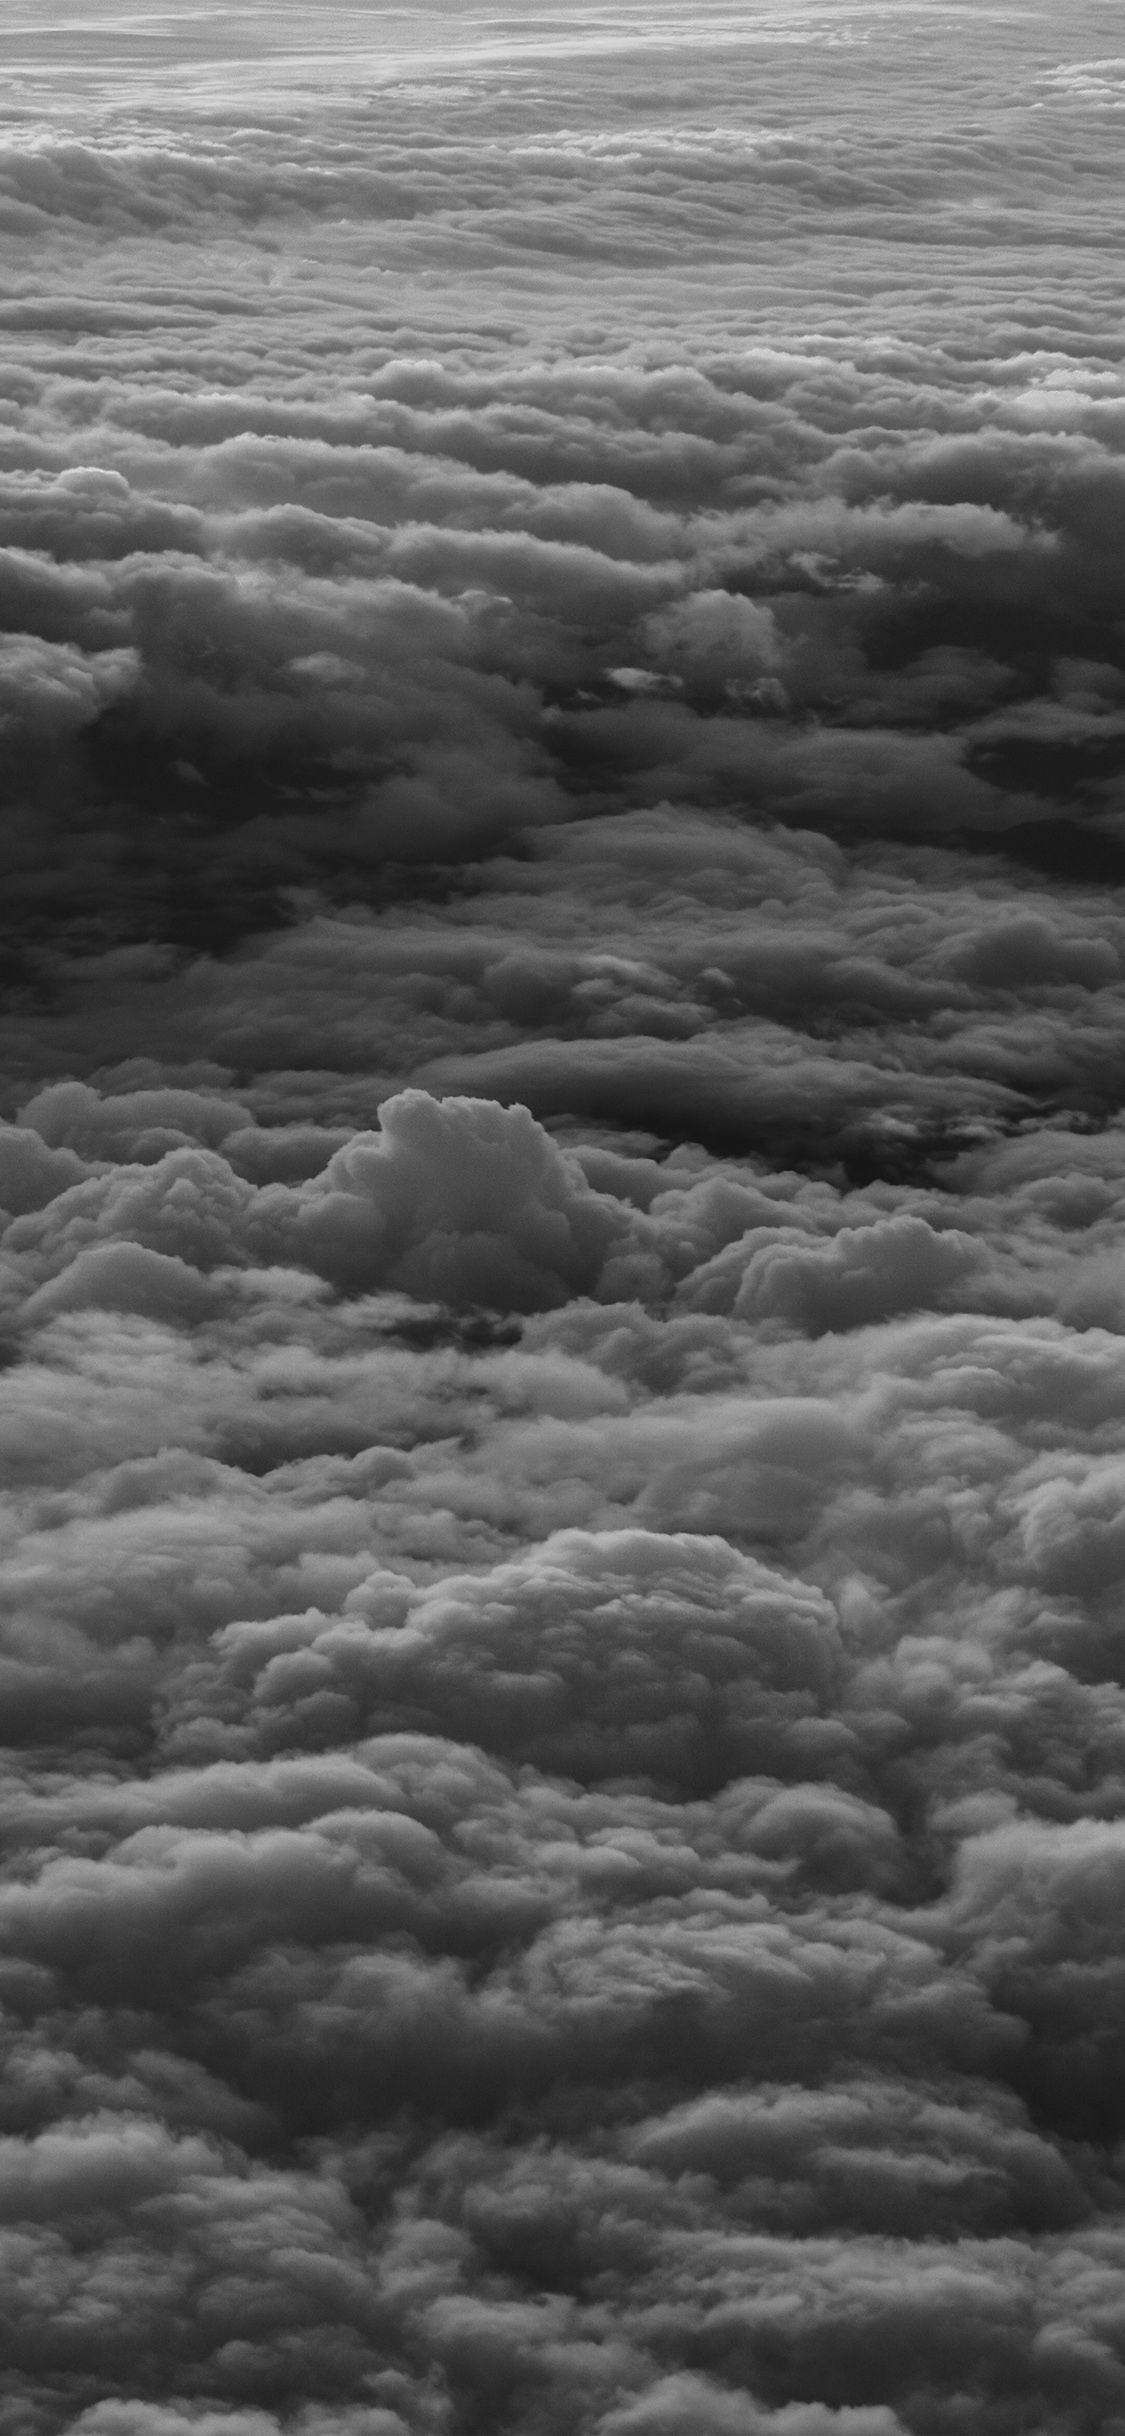 iPhone X wallpaper. cloud fly sky nature earth sunset bw dark